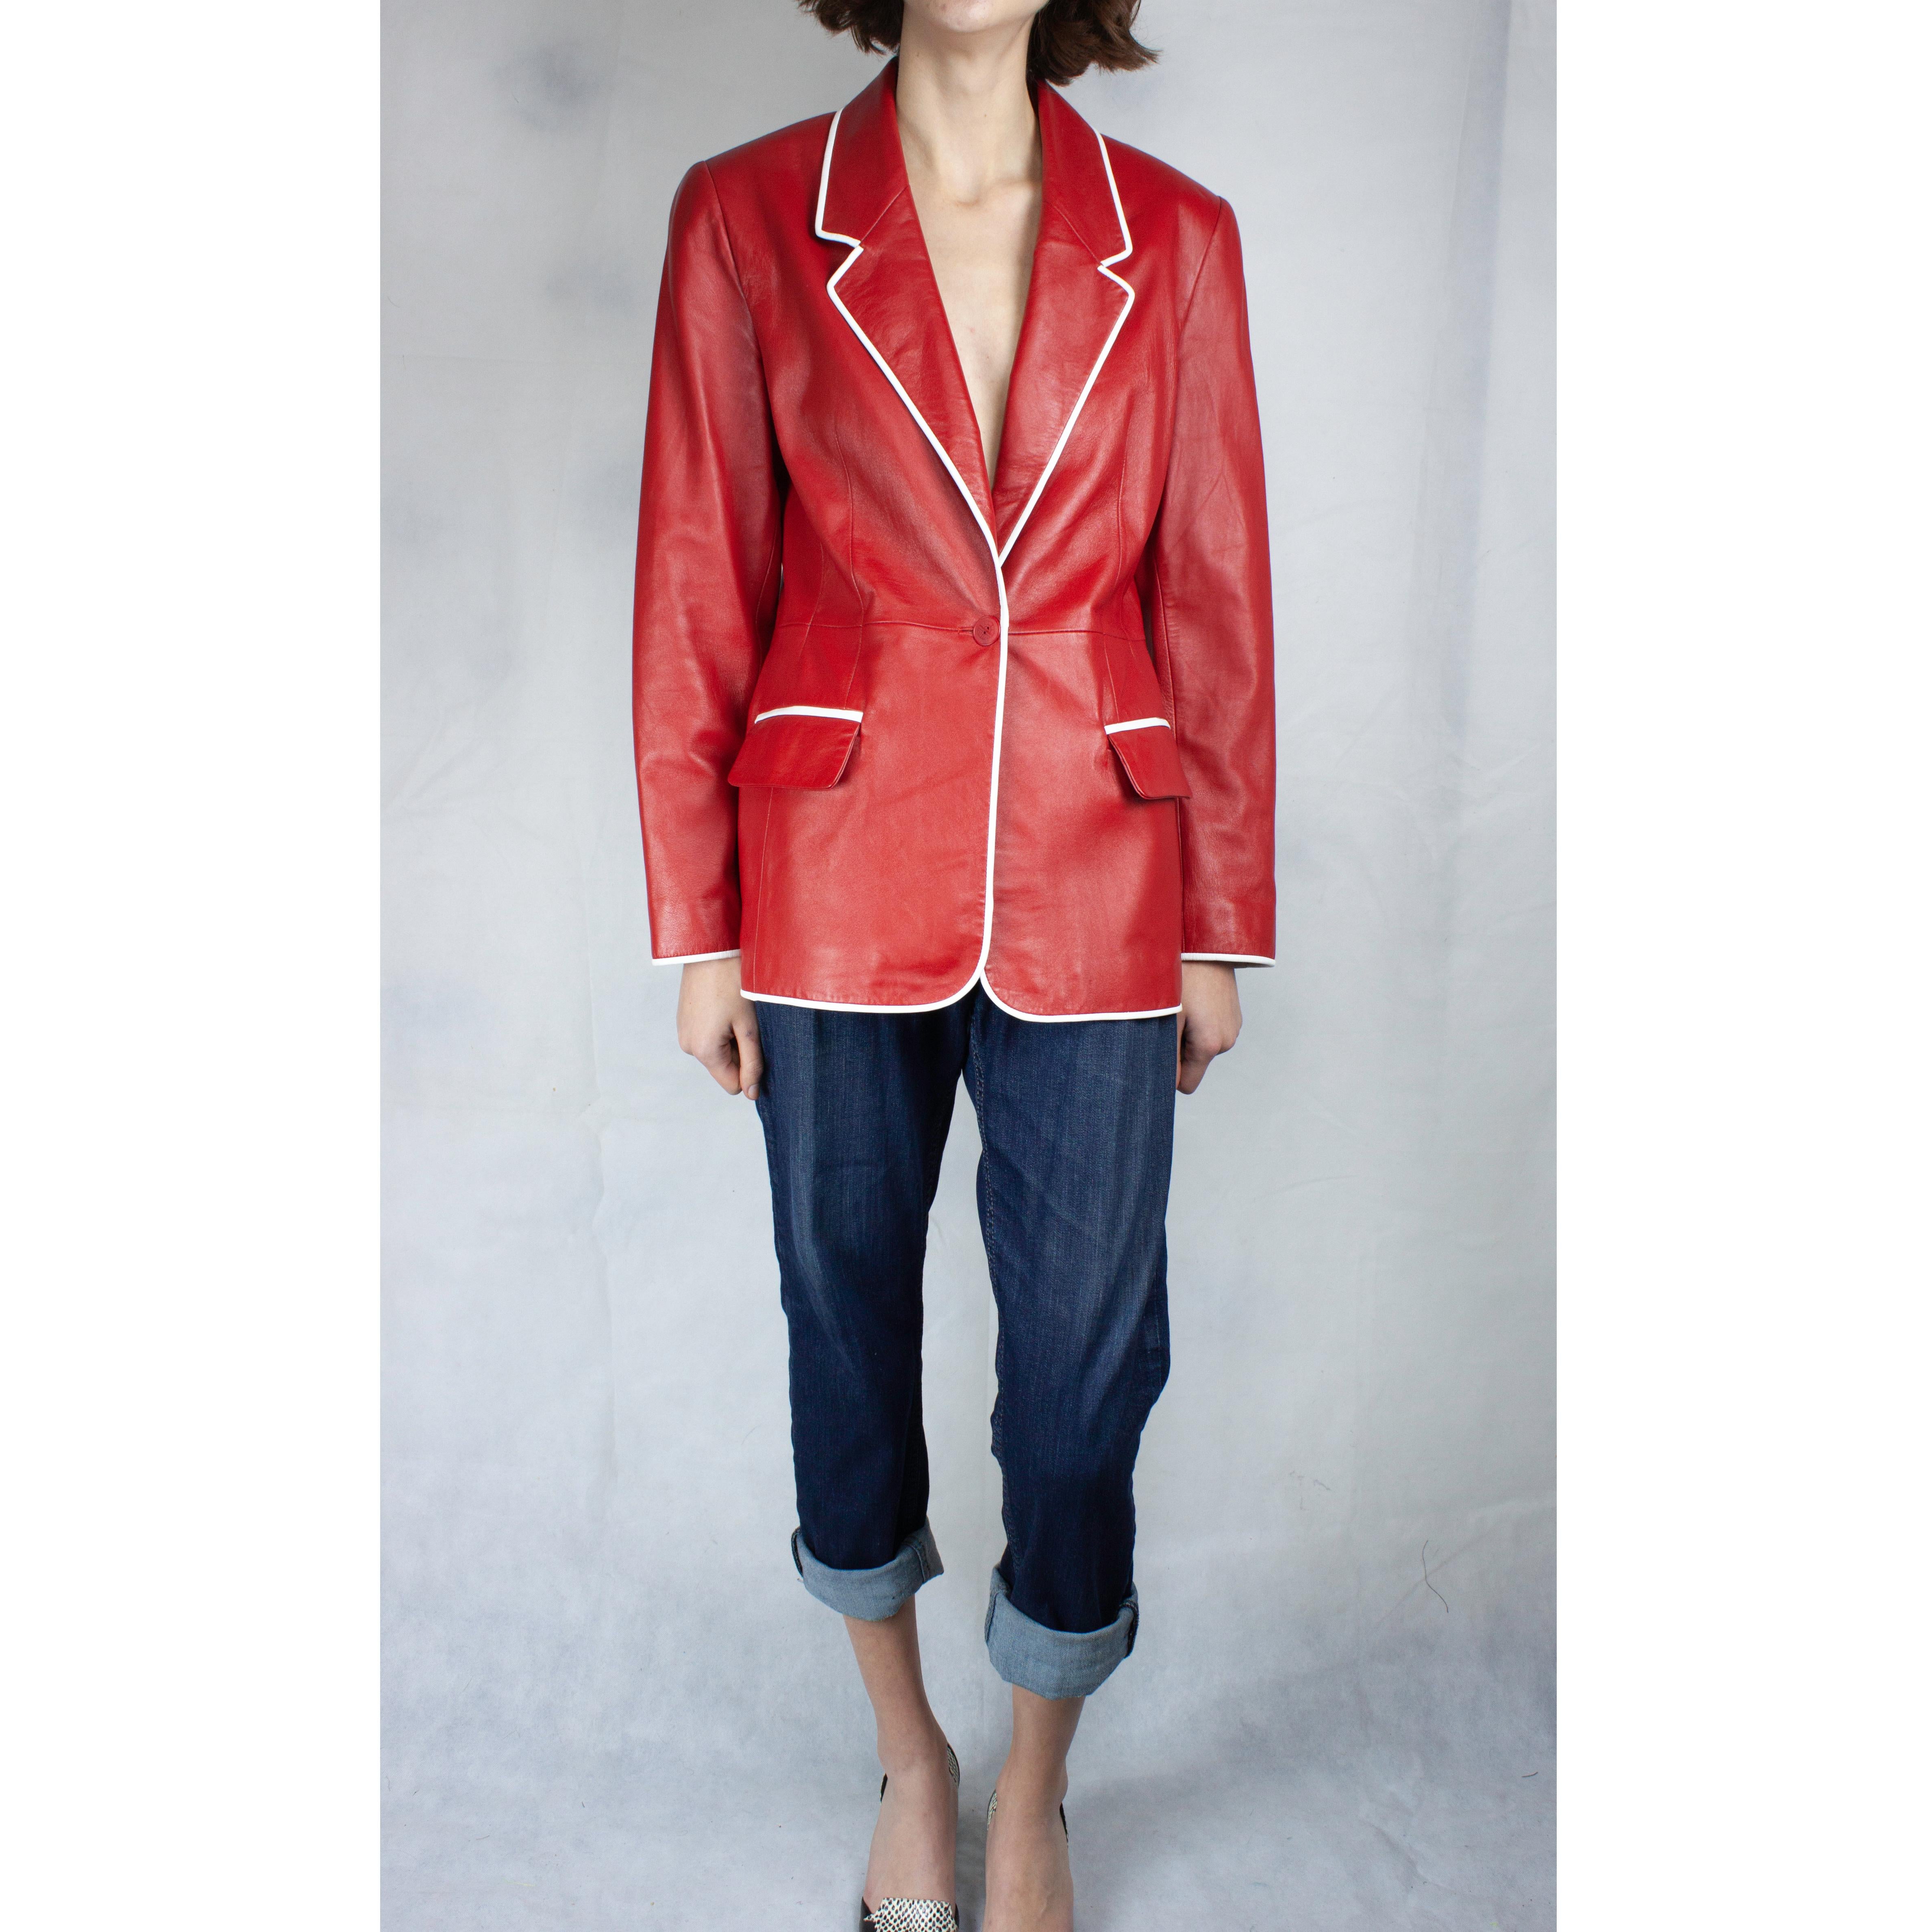 Louis Feraud red and white leather tailored jacket. circa 1980s

Throughout his career, which started in the 1950s, Louis Feraud dressed very chic women and actresses including Ingrid Bergman and Elisabeth Taylor.

Unlike Yves Saint Laurent and